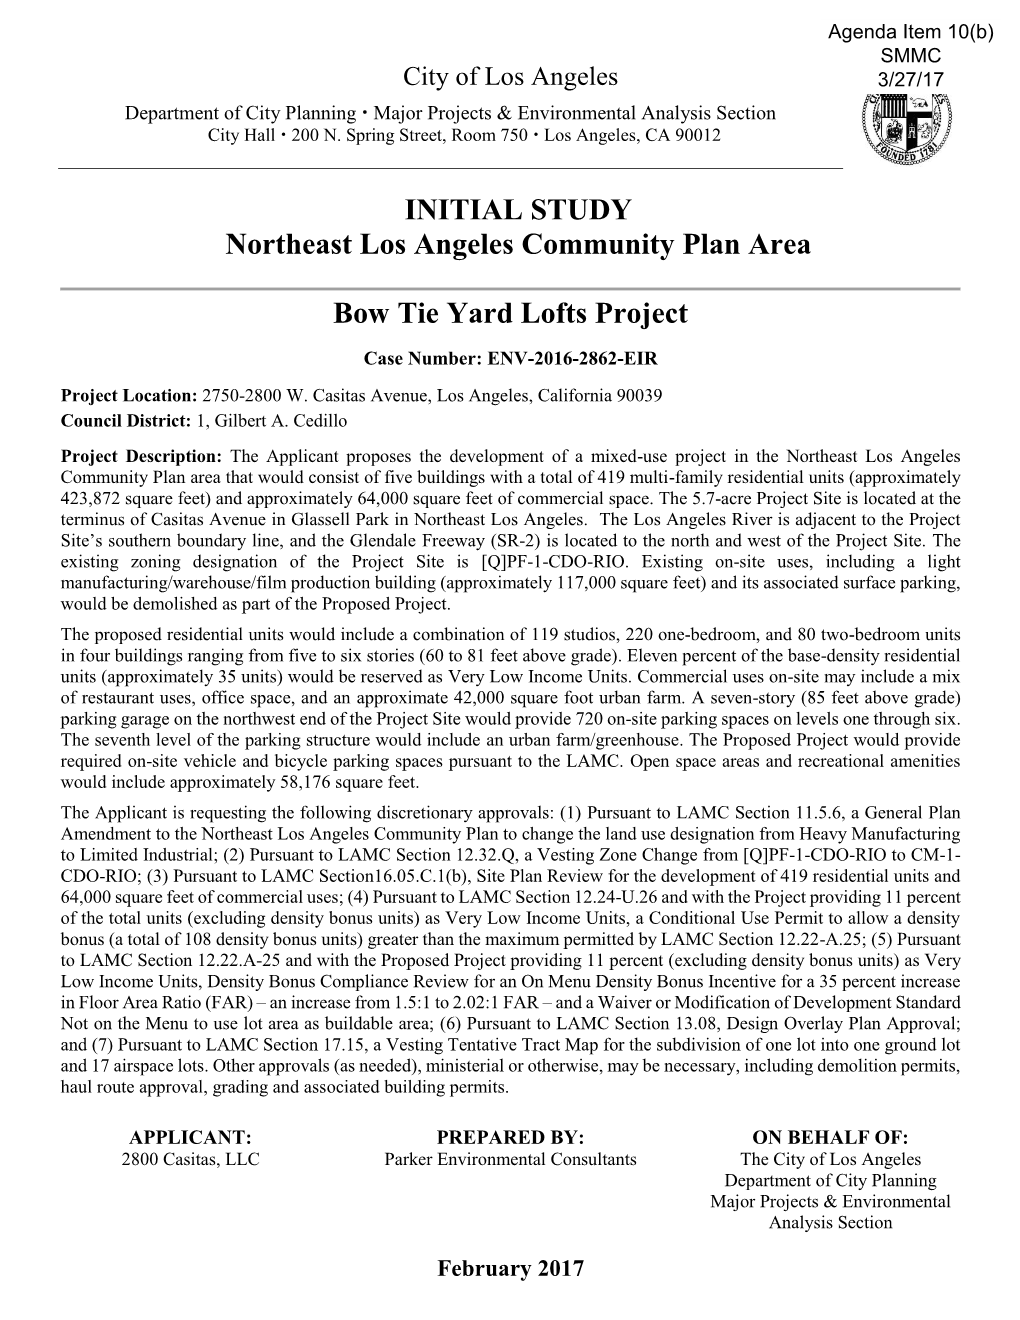 INITIAL STUDY Northeast Los Angeles Community Plan Area Bow